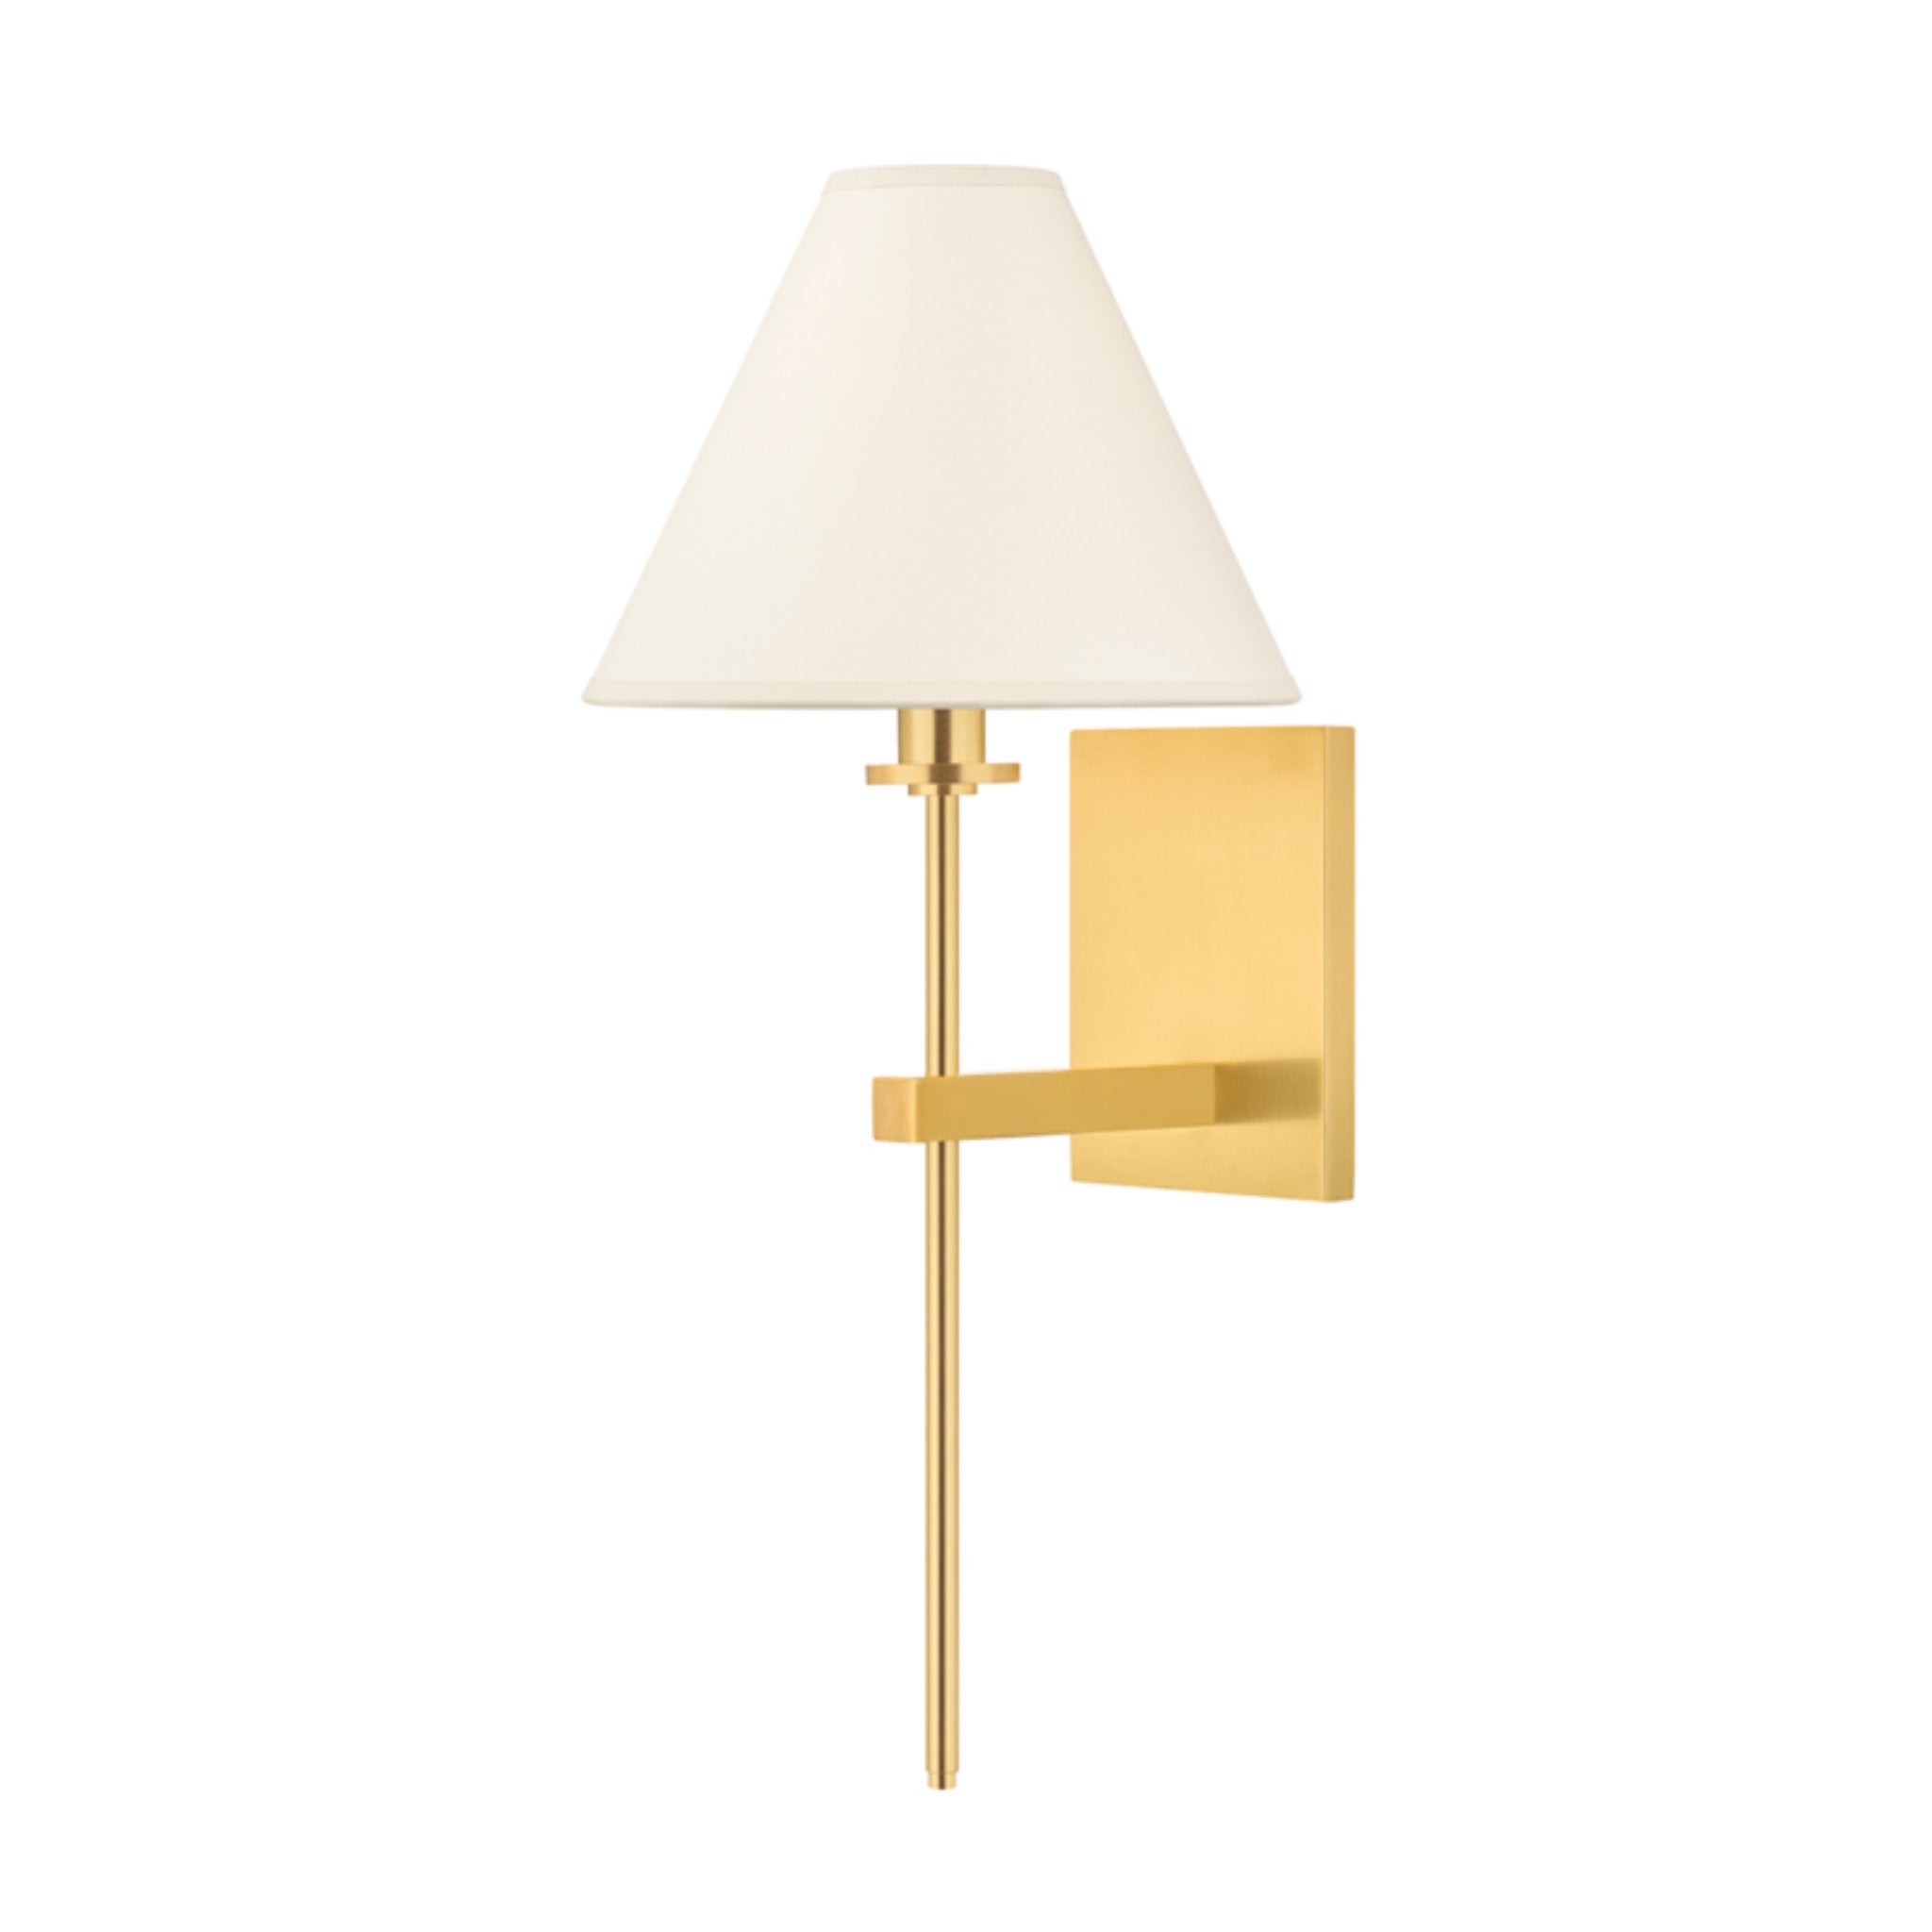 Graham 1 Light Wall Sconce in Aged Brass